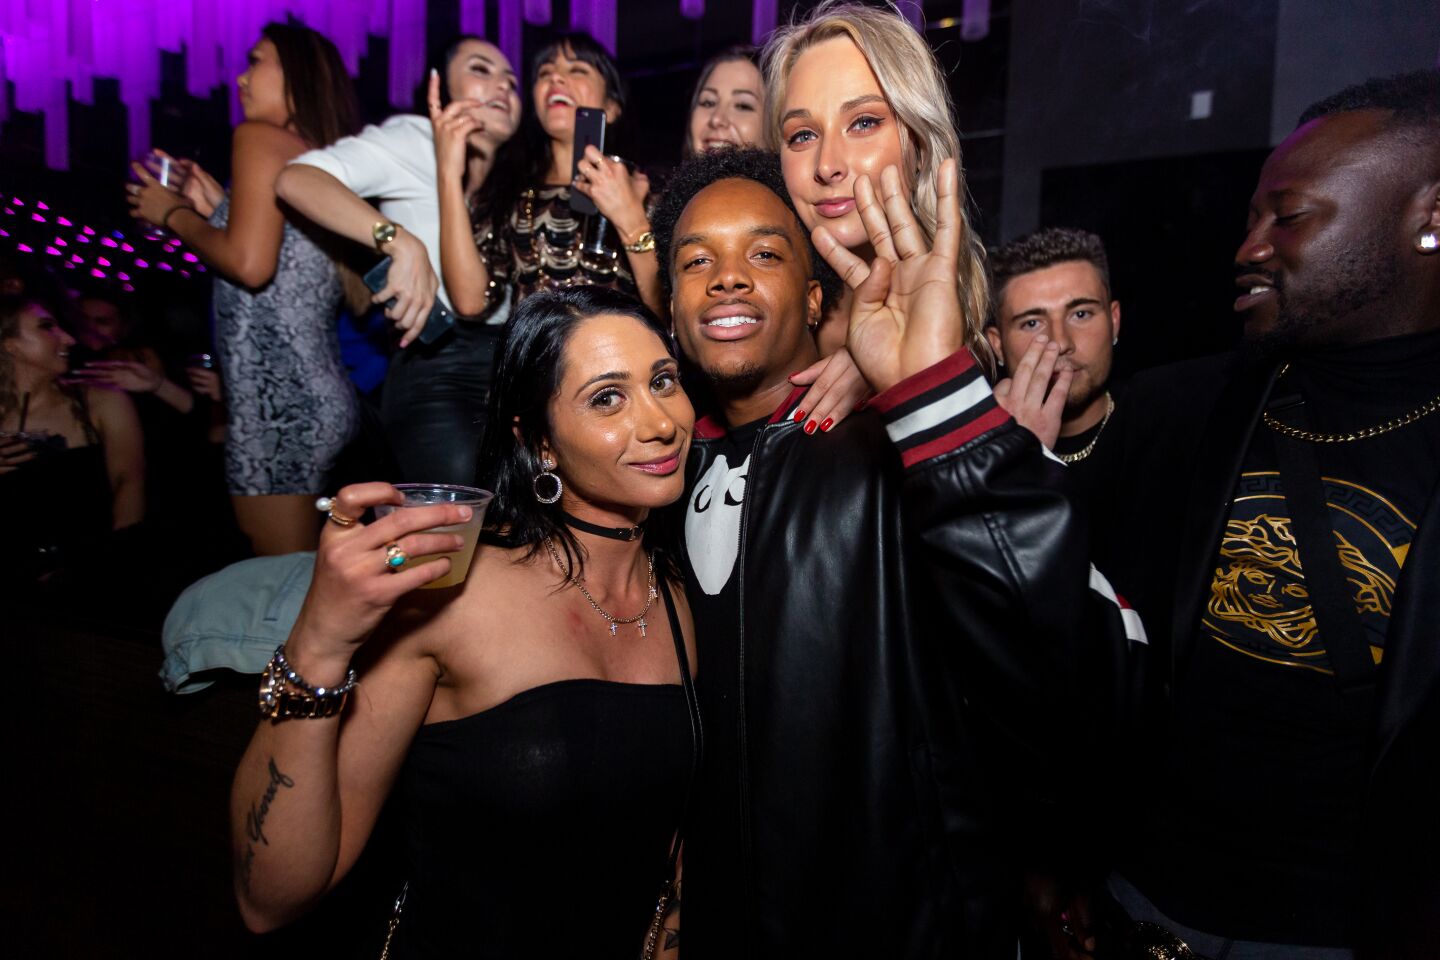 Parq's Fifth Anniversary with Saweetie and Trey Songz